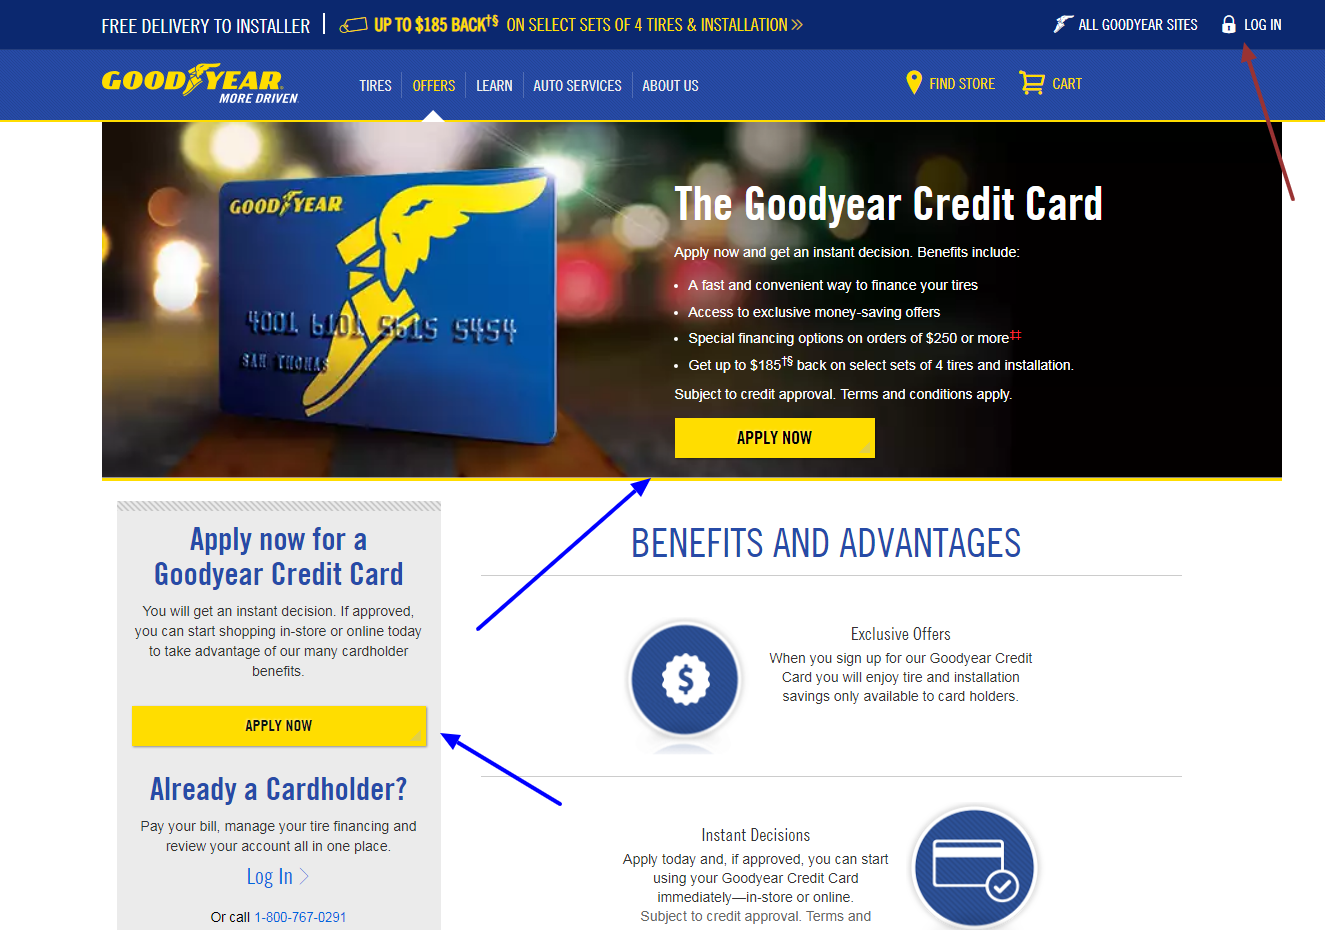 log in to your goodyear credit card account